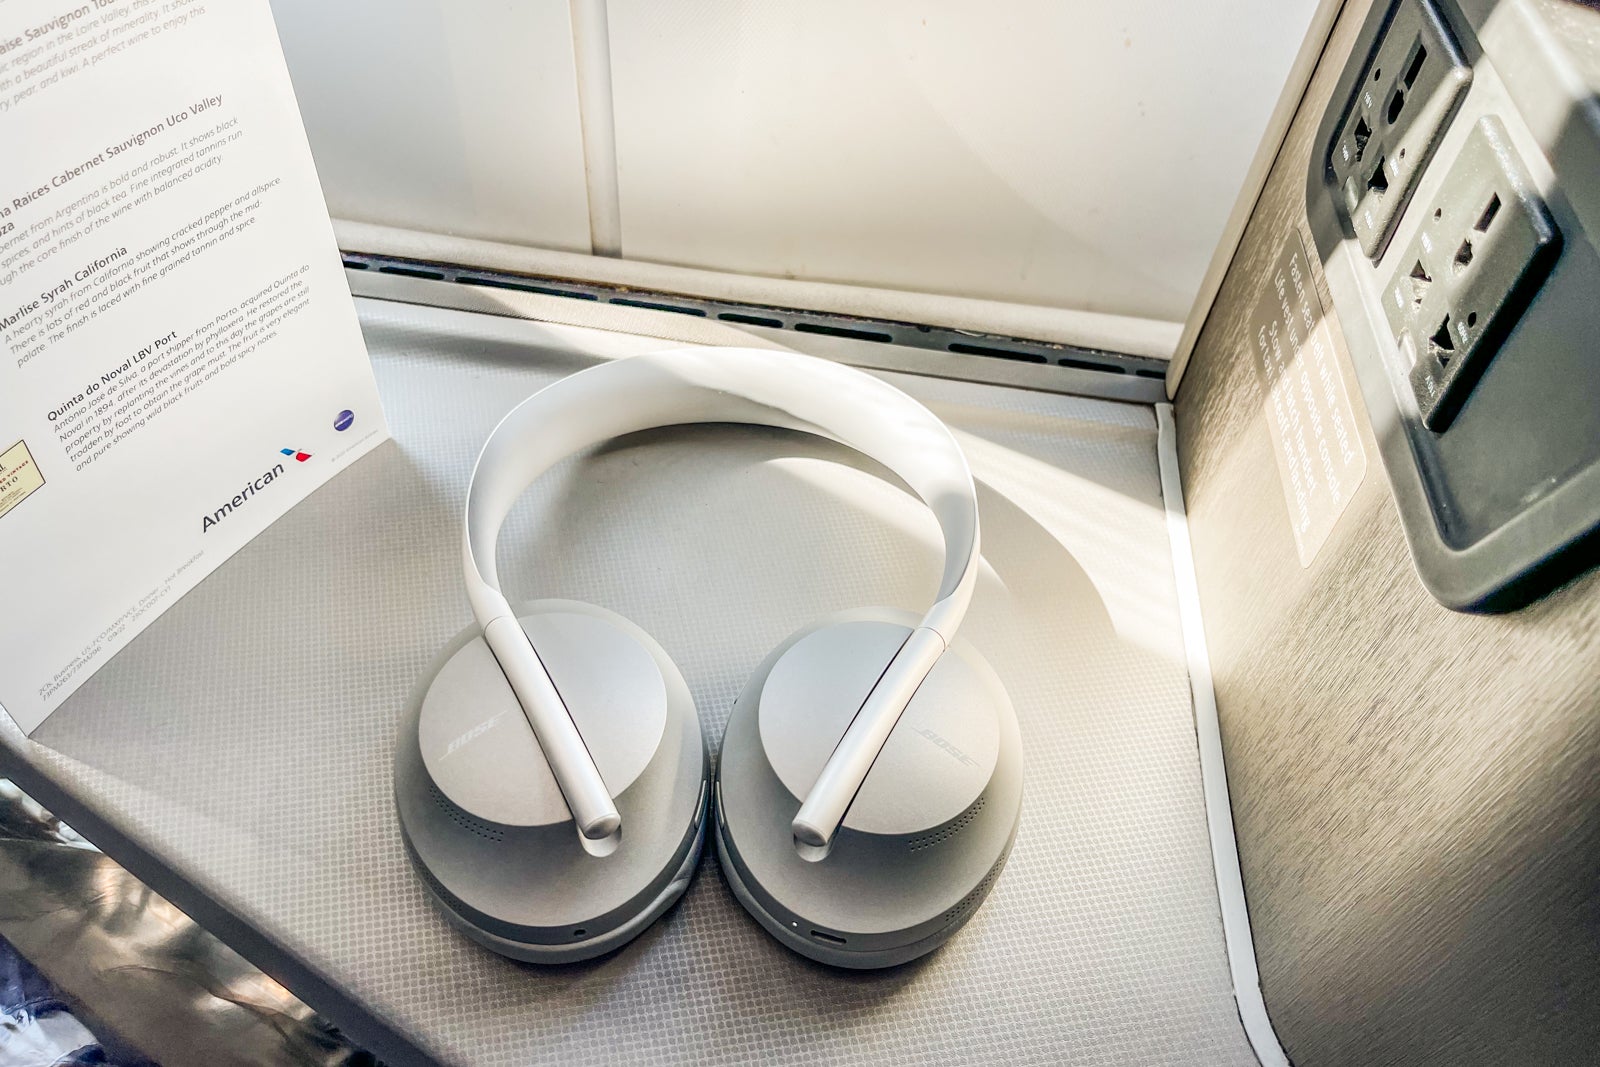 Bose Noise Cancelling Headphones 700 review: less business, more